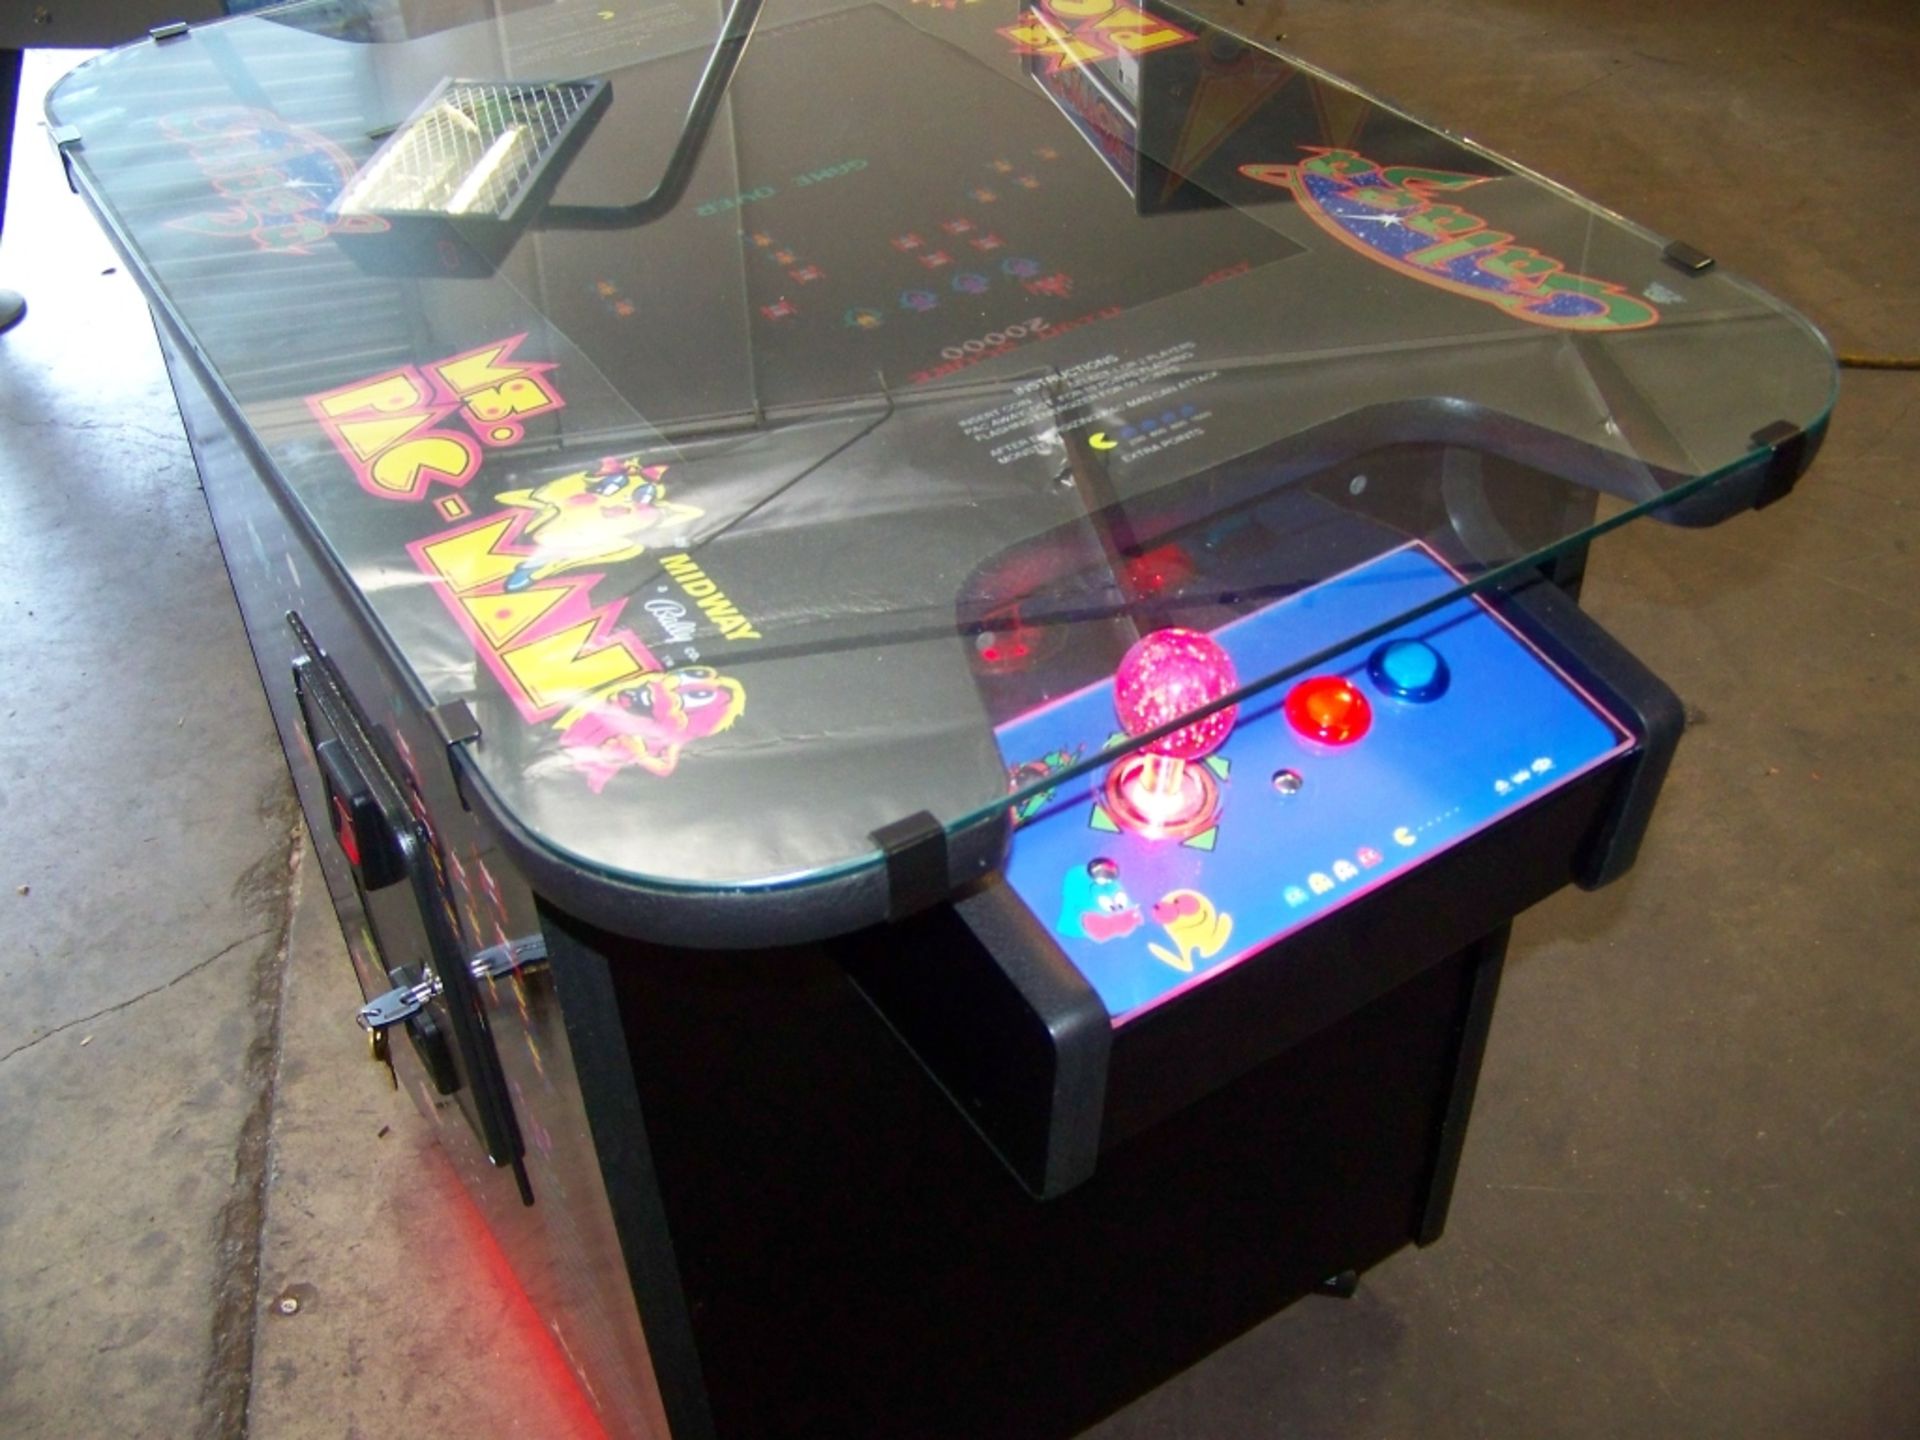 60 IN 1 MULTICADE COCKTAIL ARCADE BRAND NEW! - Image 2 of 4